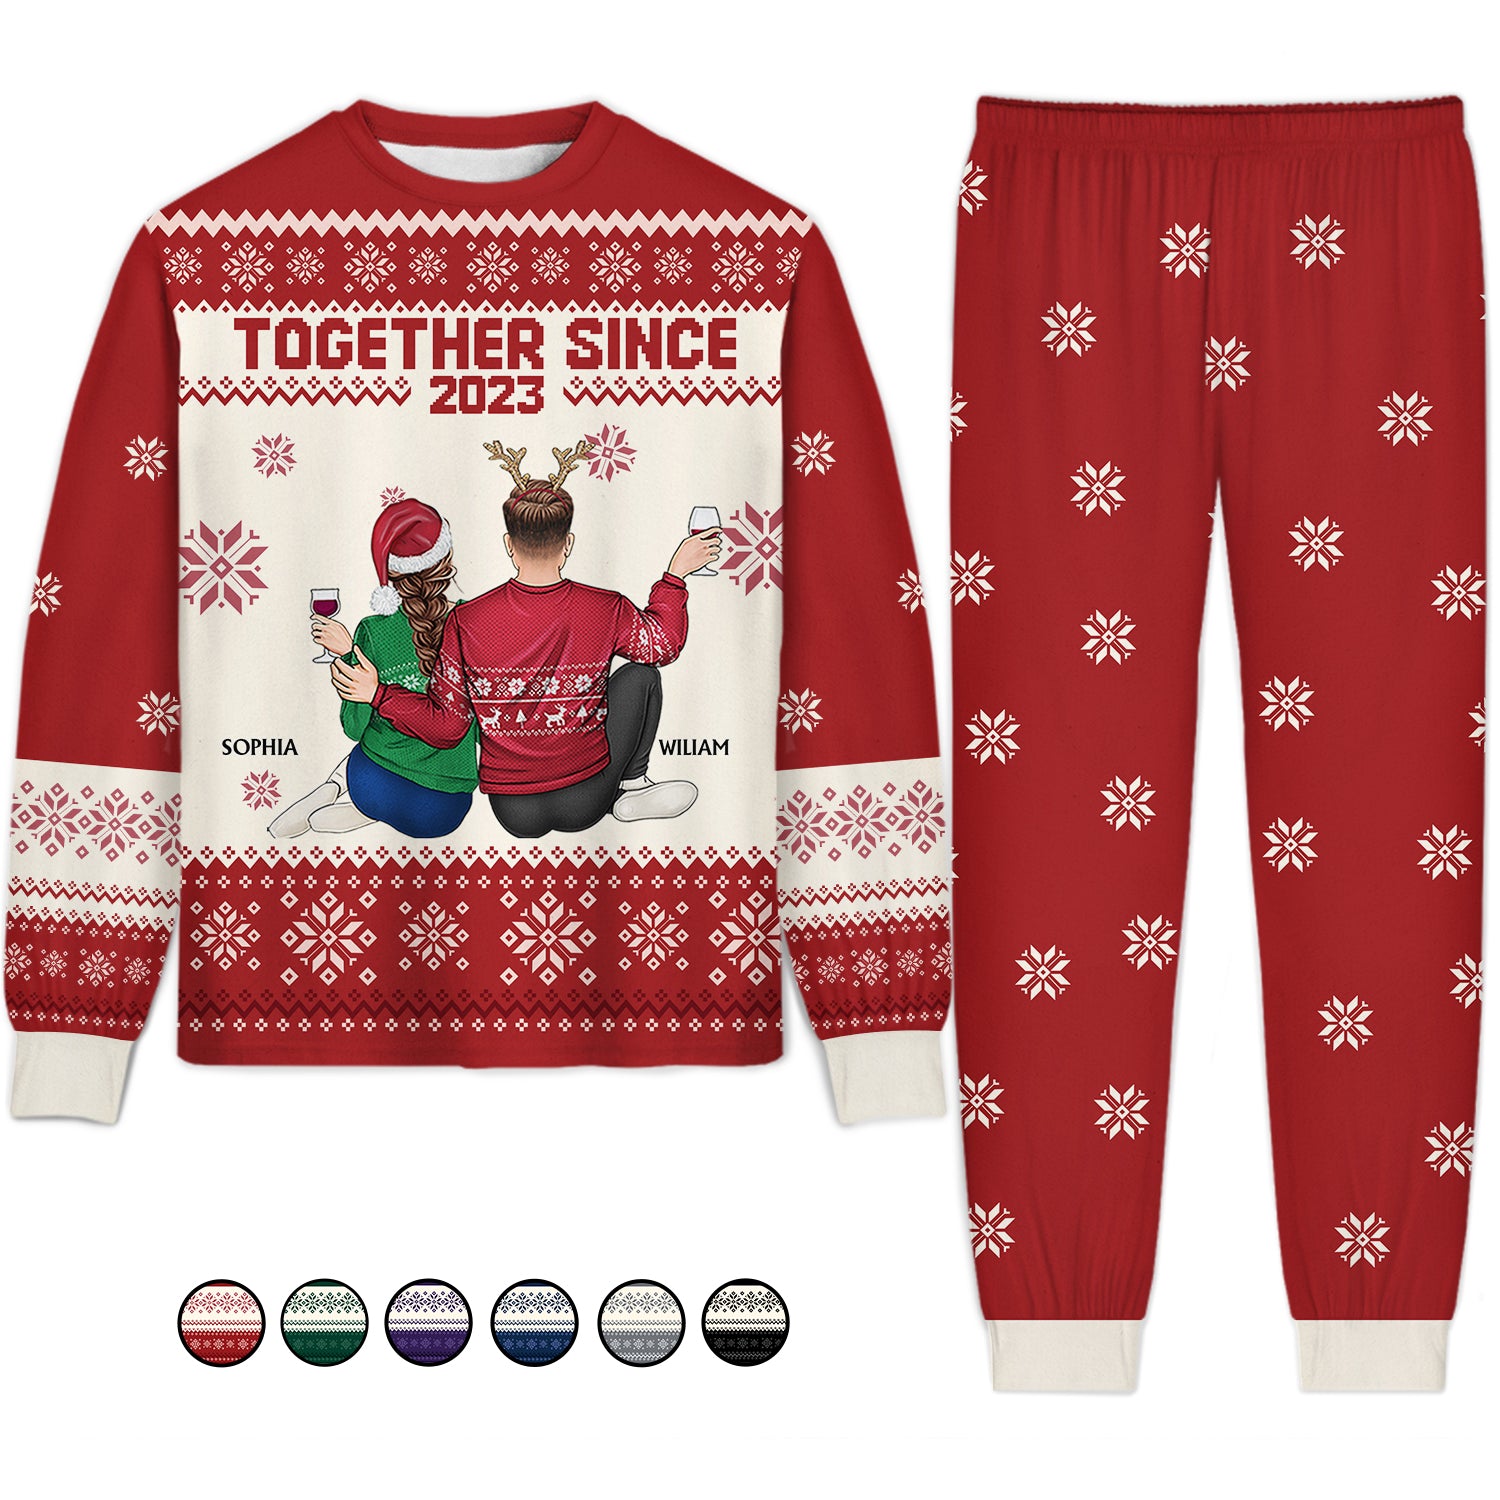 Together Since - Christmas Gift For Couples, Husband, Wife - Personalized Unisex Pajamas Set